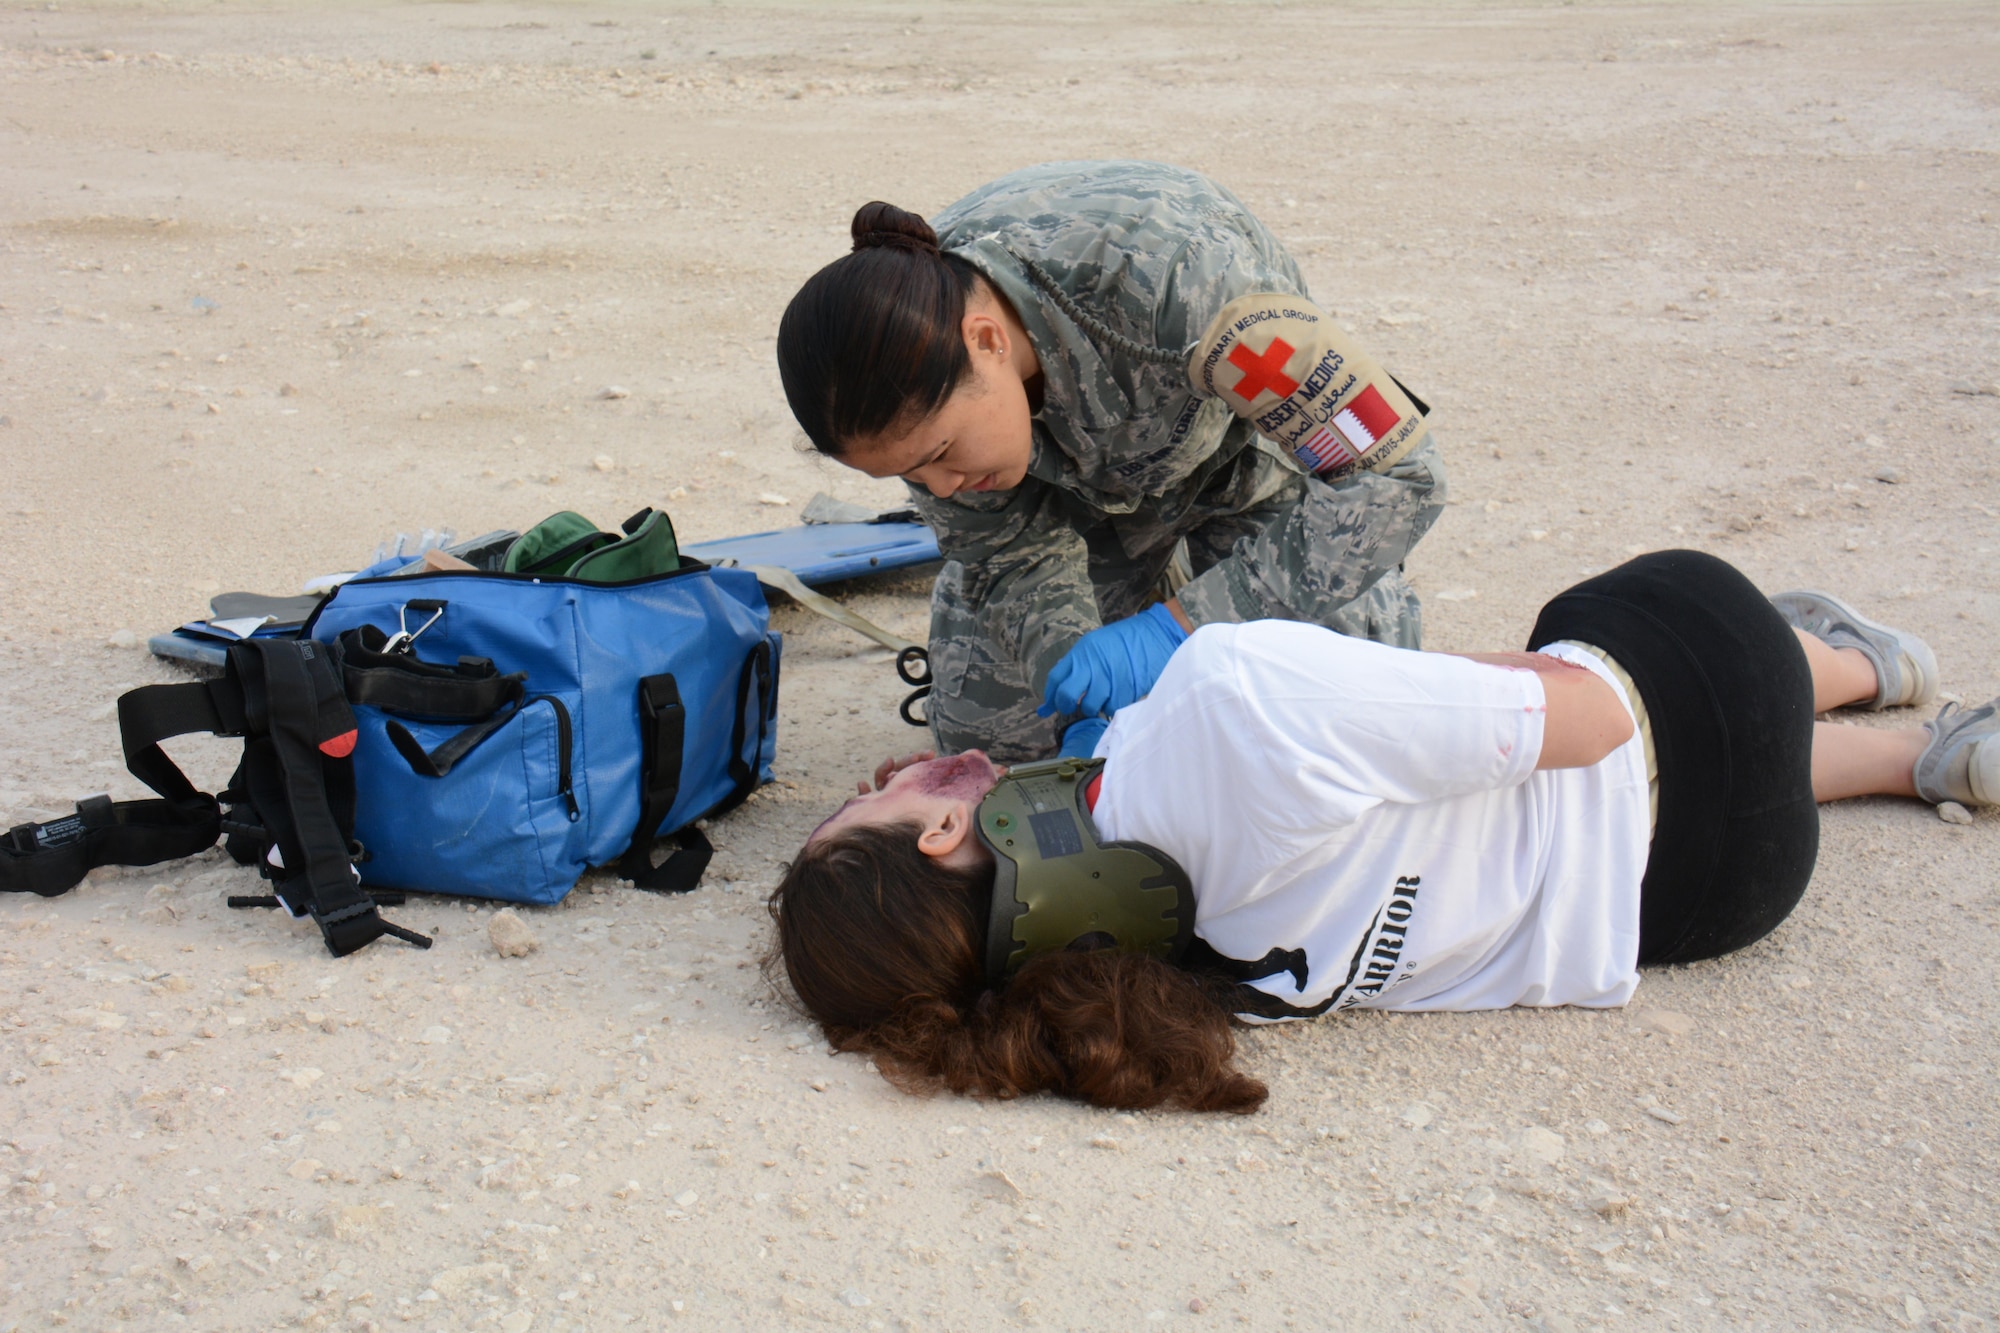 Staff Sgt. Mary Llaguno, 379th Expeditionary Medical Group, checks on one of eight victims of a mock car accident during a training exercise at Al Udeid Air Base, Qatar Dec. 15. More than 50 first responders participated in the exercise, including medics and firefighters. The victims of the accident were transported to the Blatchford-Preston Complex Clinic where they received emergency medical treatment. (U.S. Air Force photo by Tech. Sgt. James Hodgman/Released)